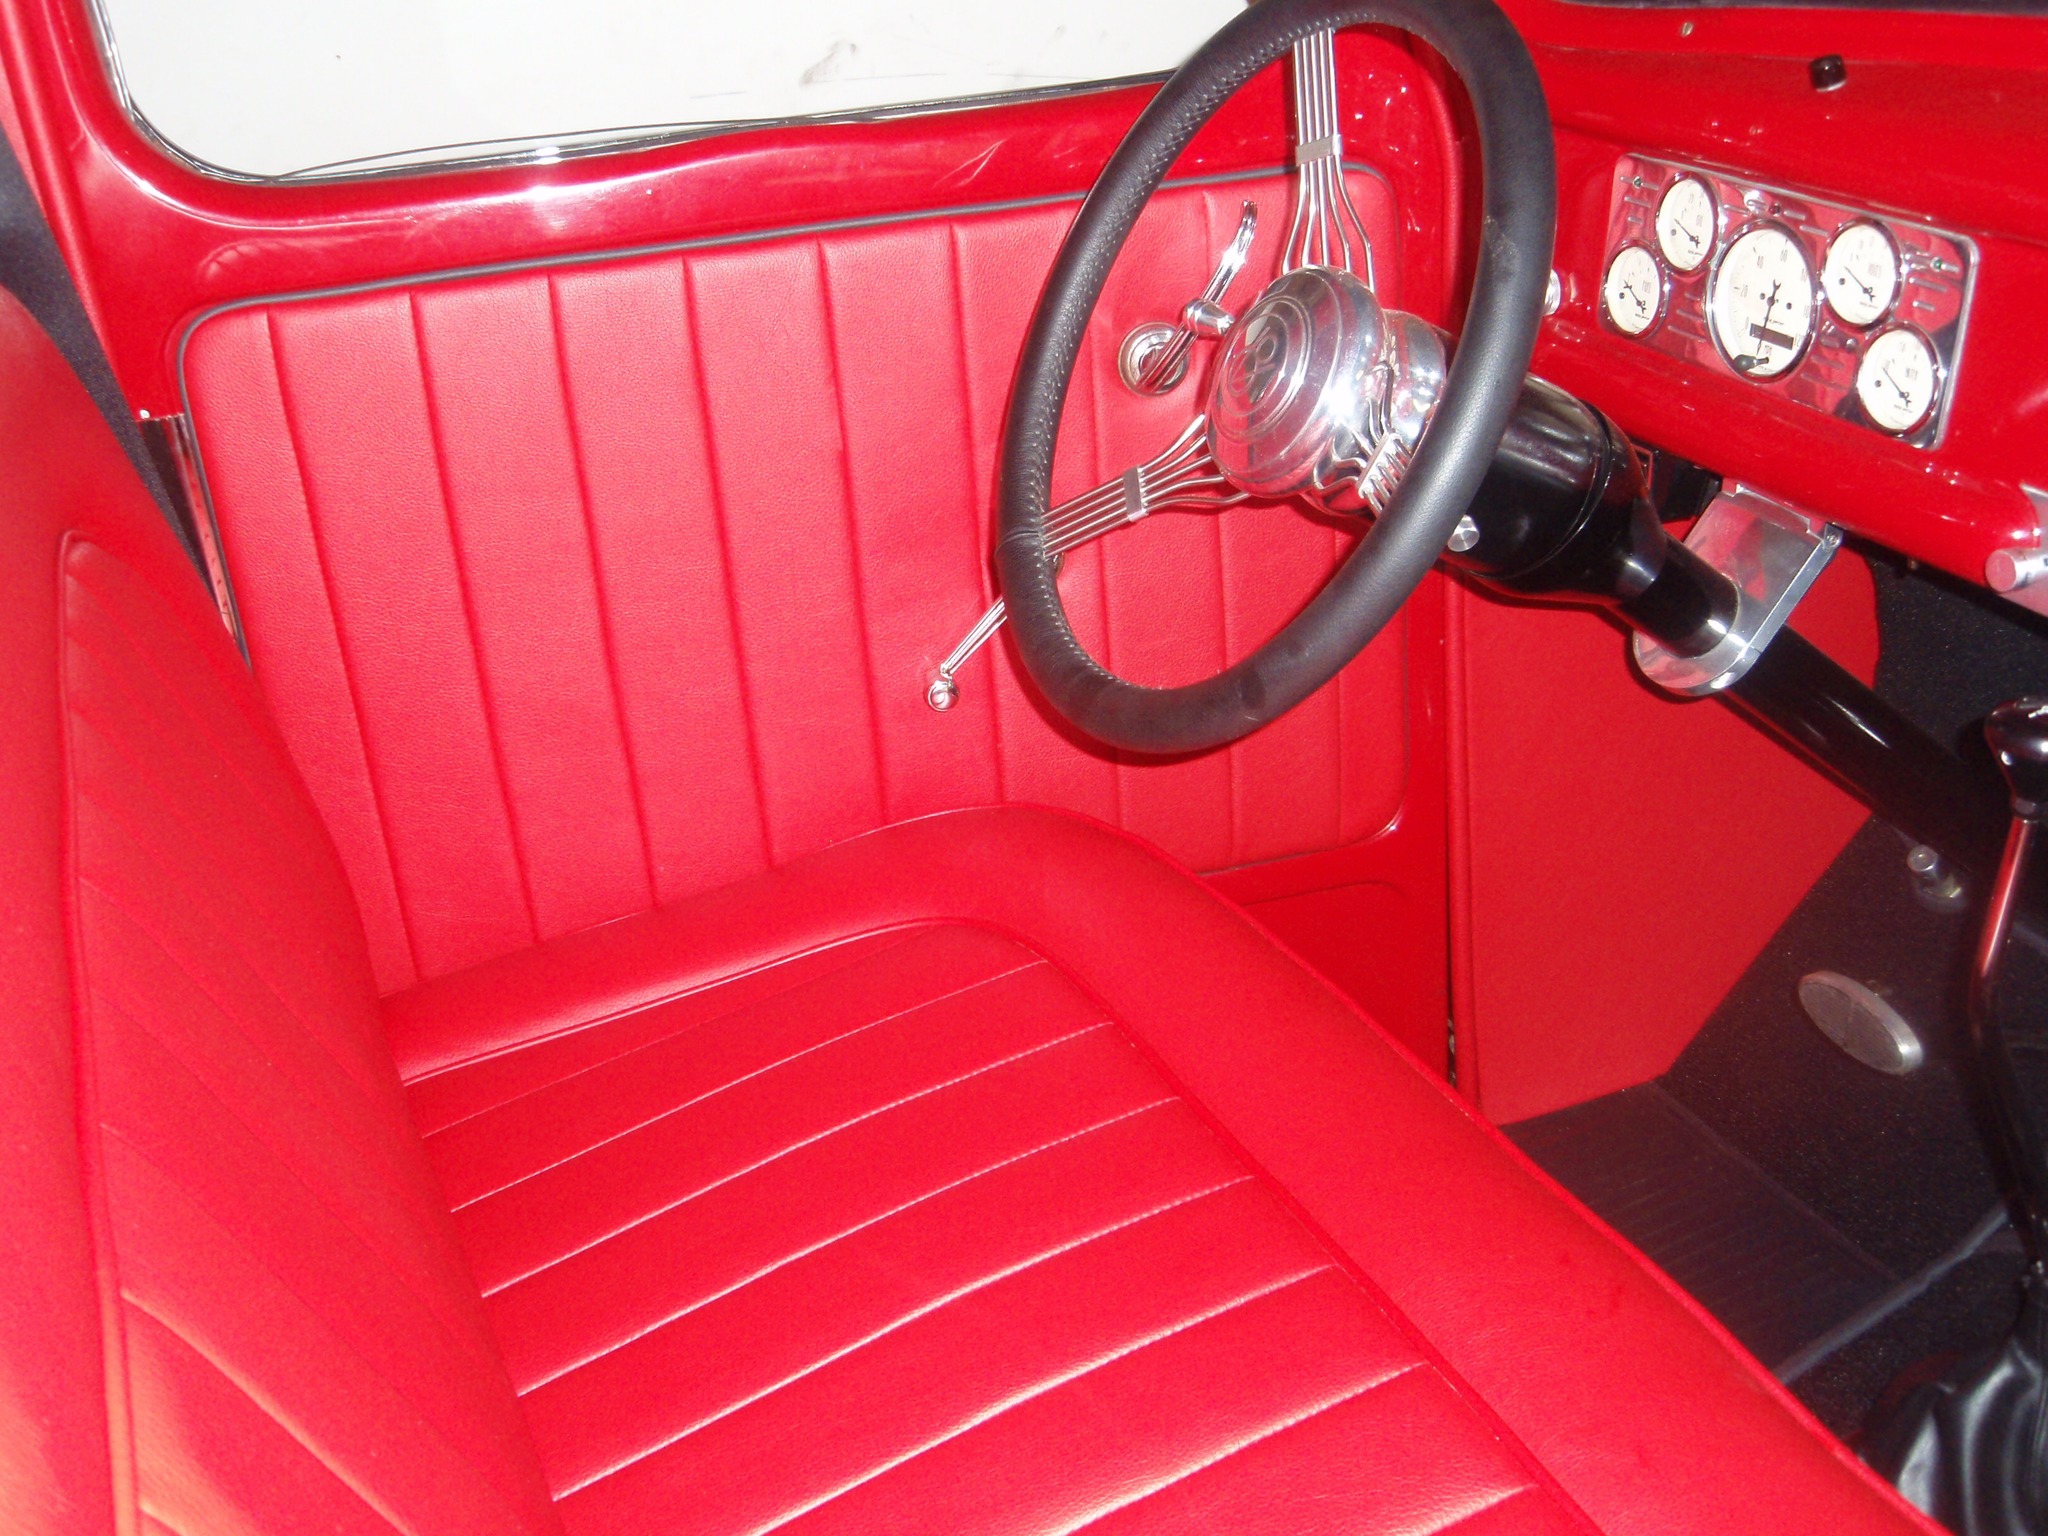 Red Ford Interior